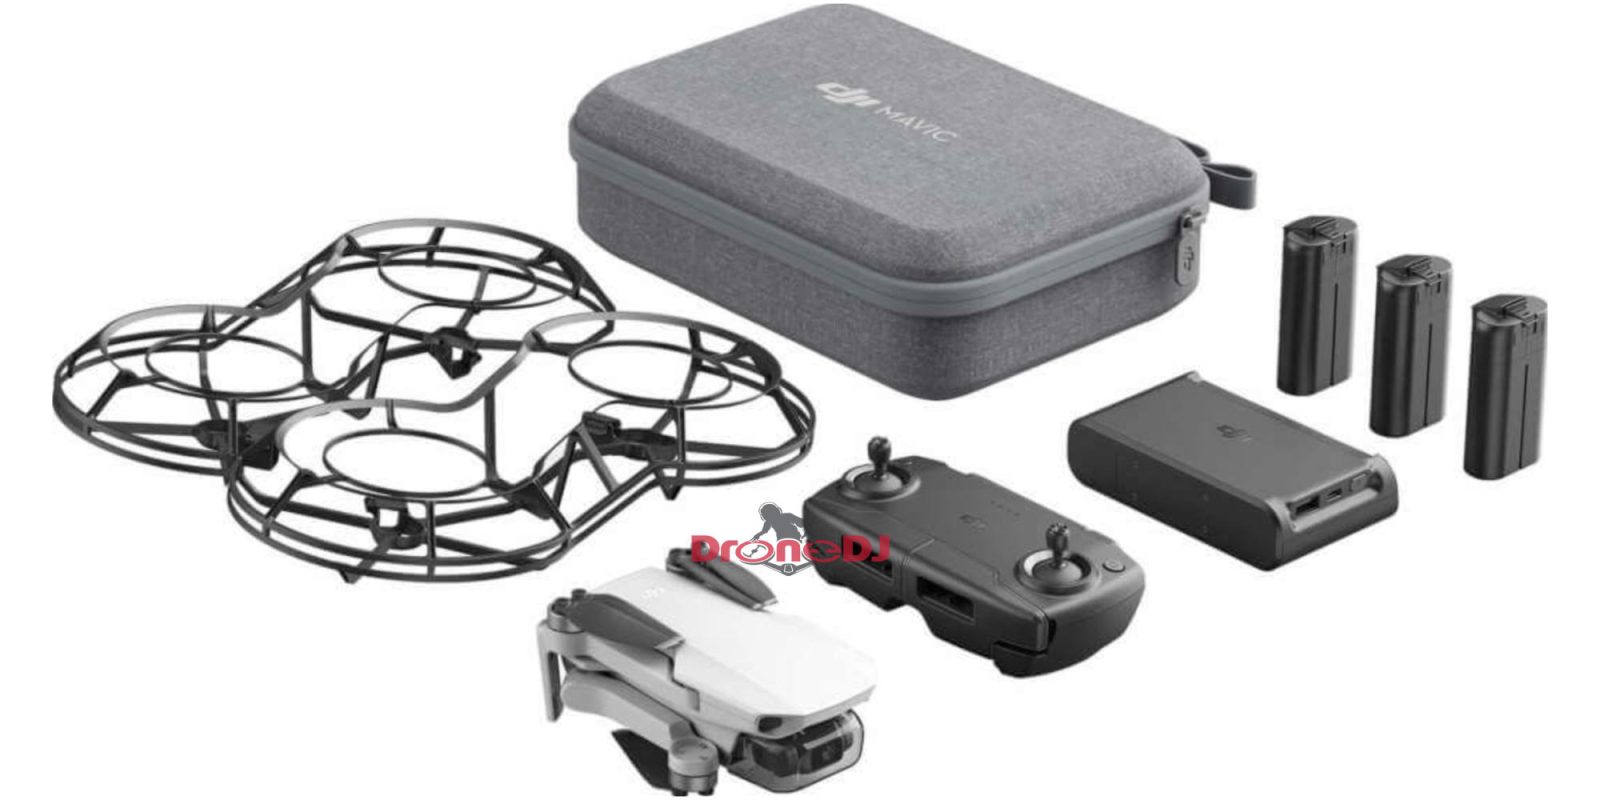 DJI Mavic Mini Fly More Combo adds extra batteries and prop guard